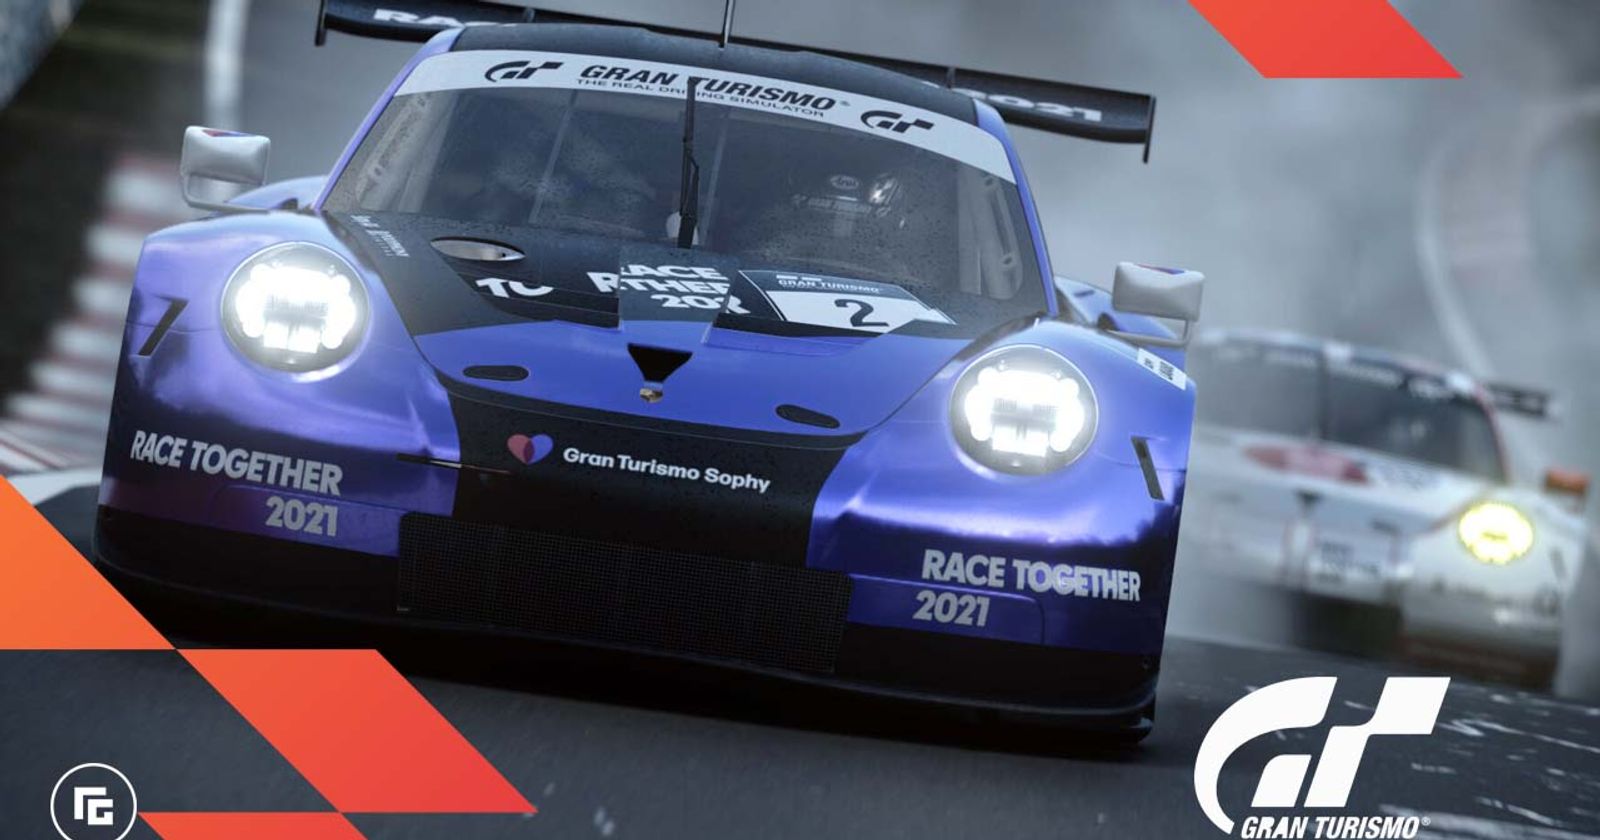 Watch Gran Turismo Sophy AI beat the best GT7 drivers in the world